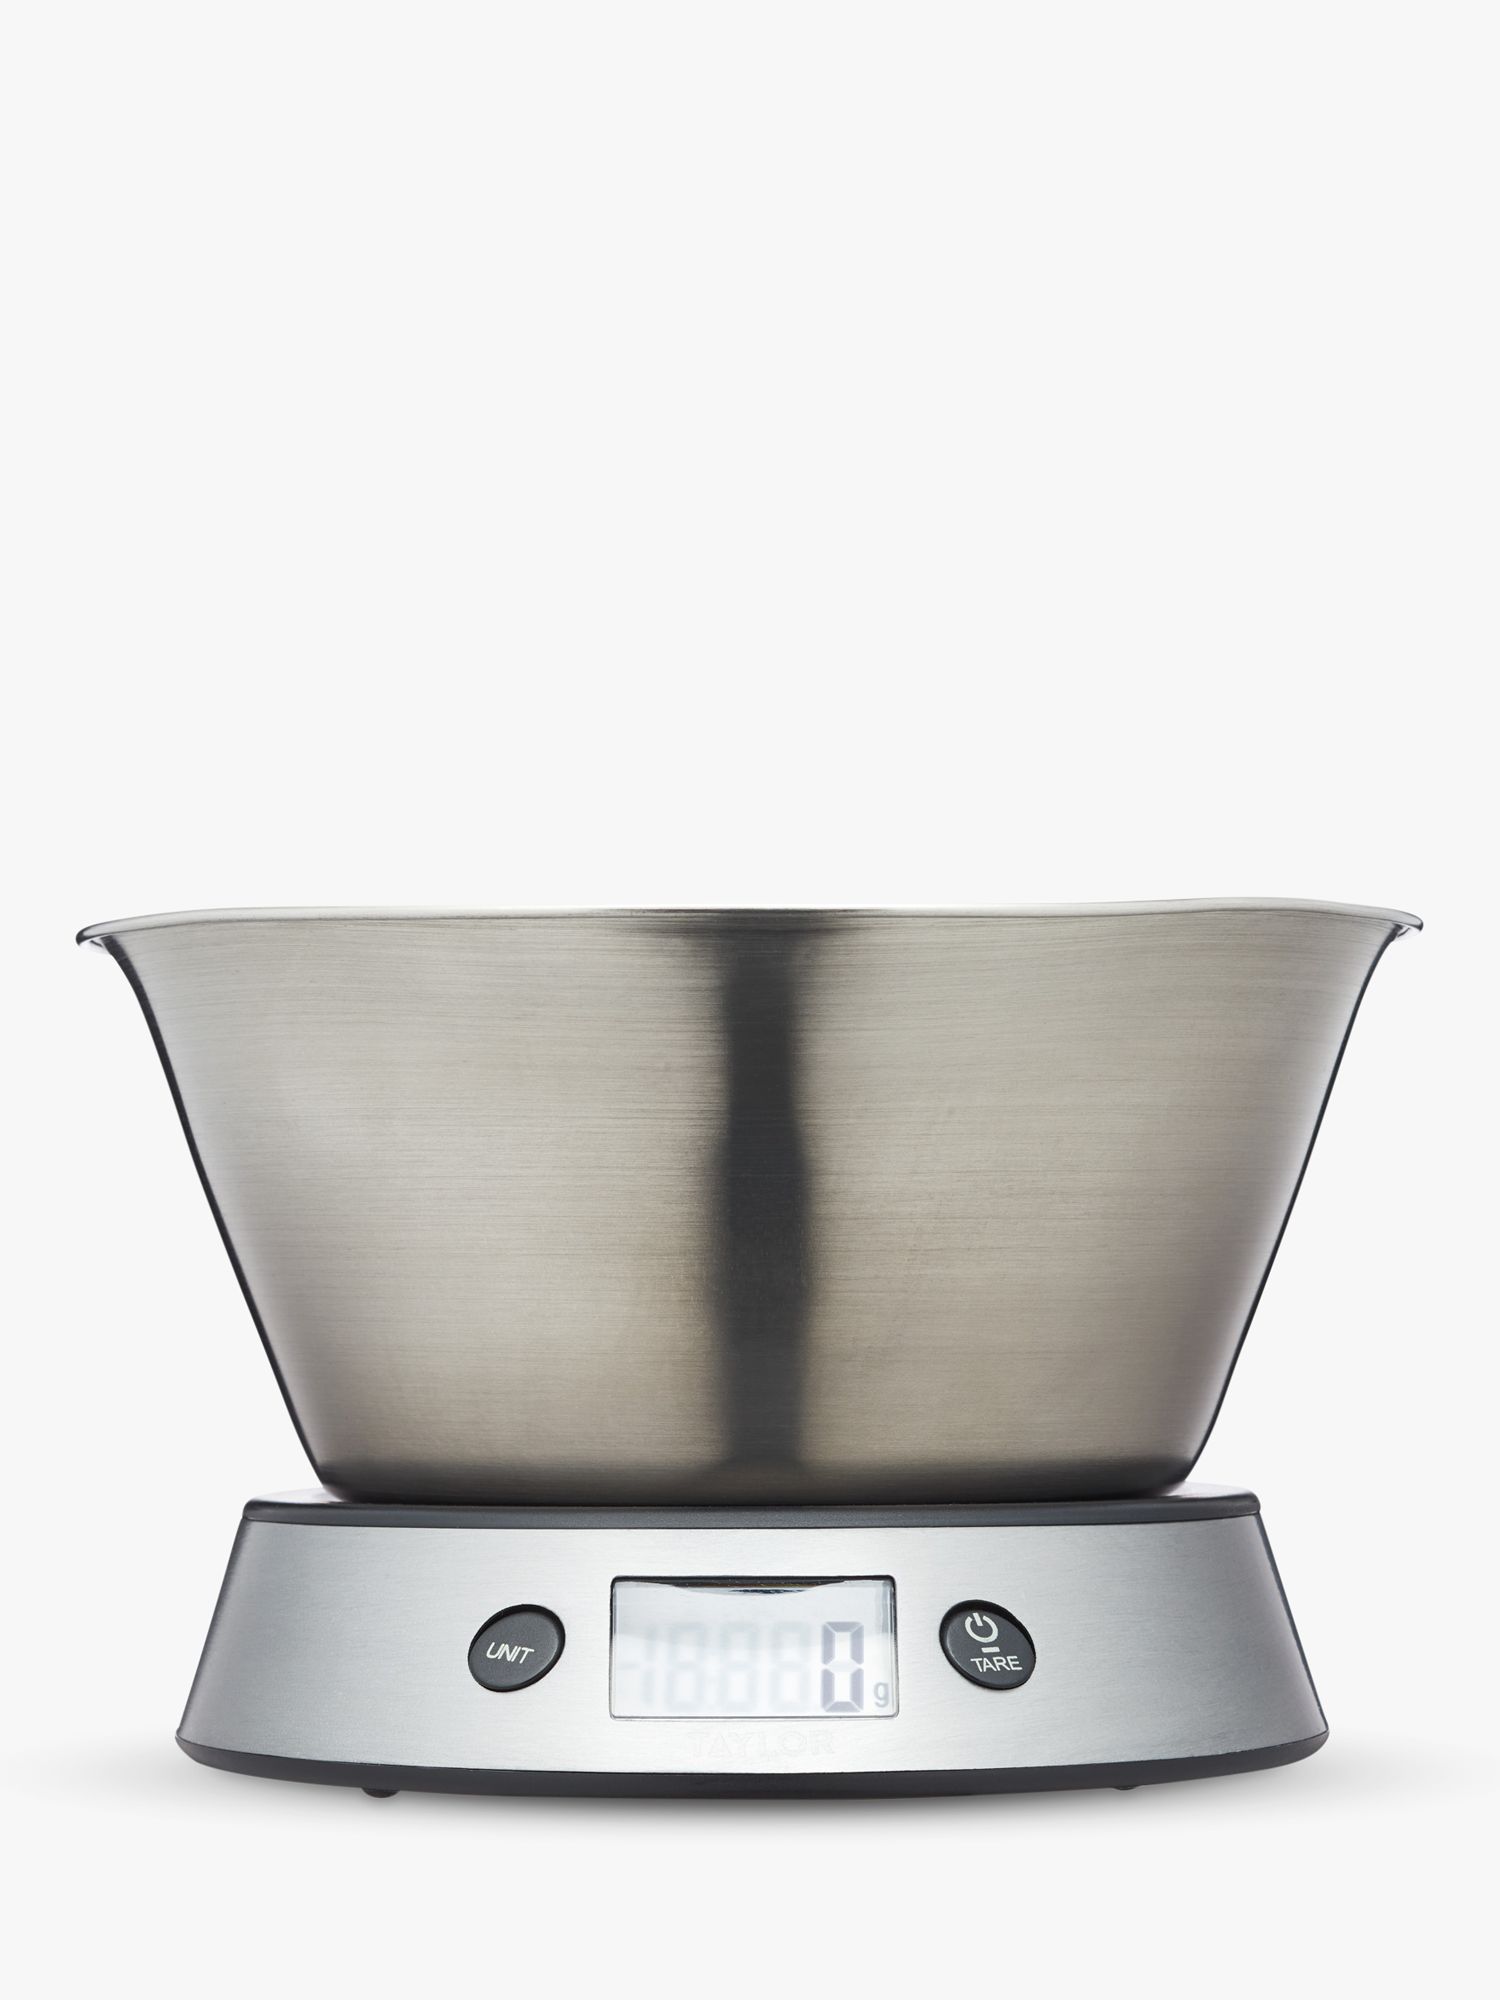 Save 50% on a digital food scale with this deal from